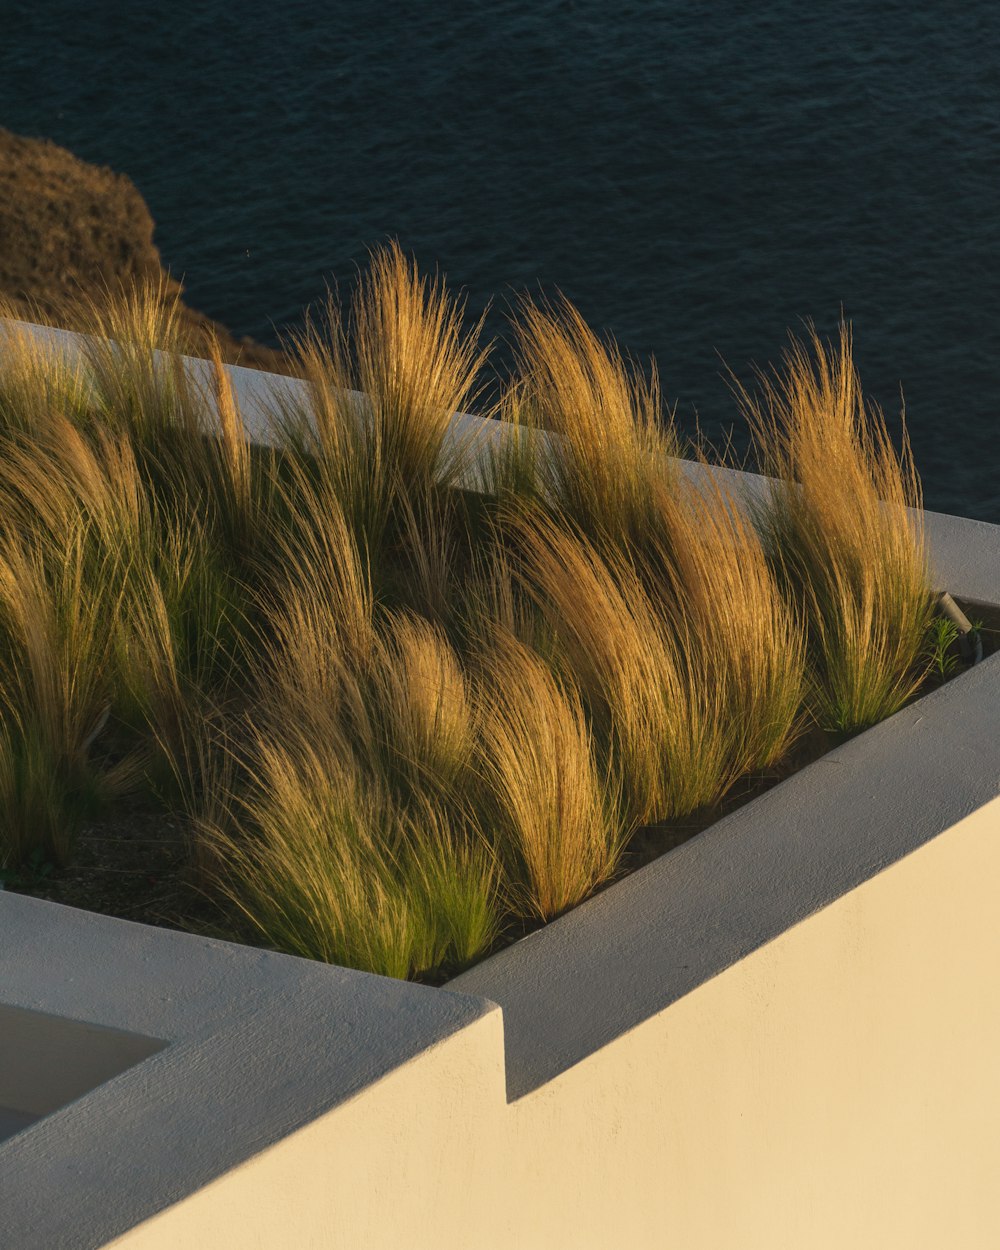 a planter filled with grass next to a body of water